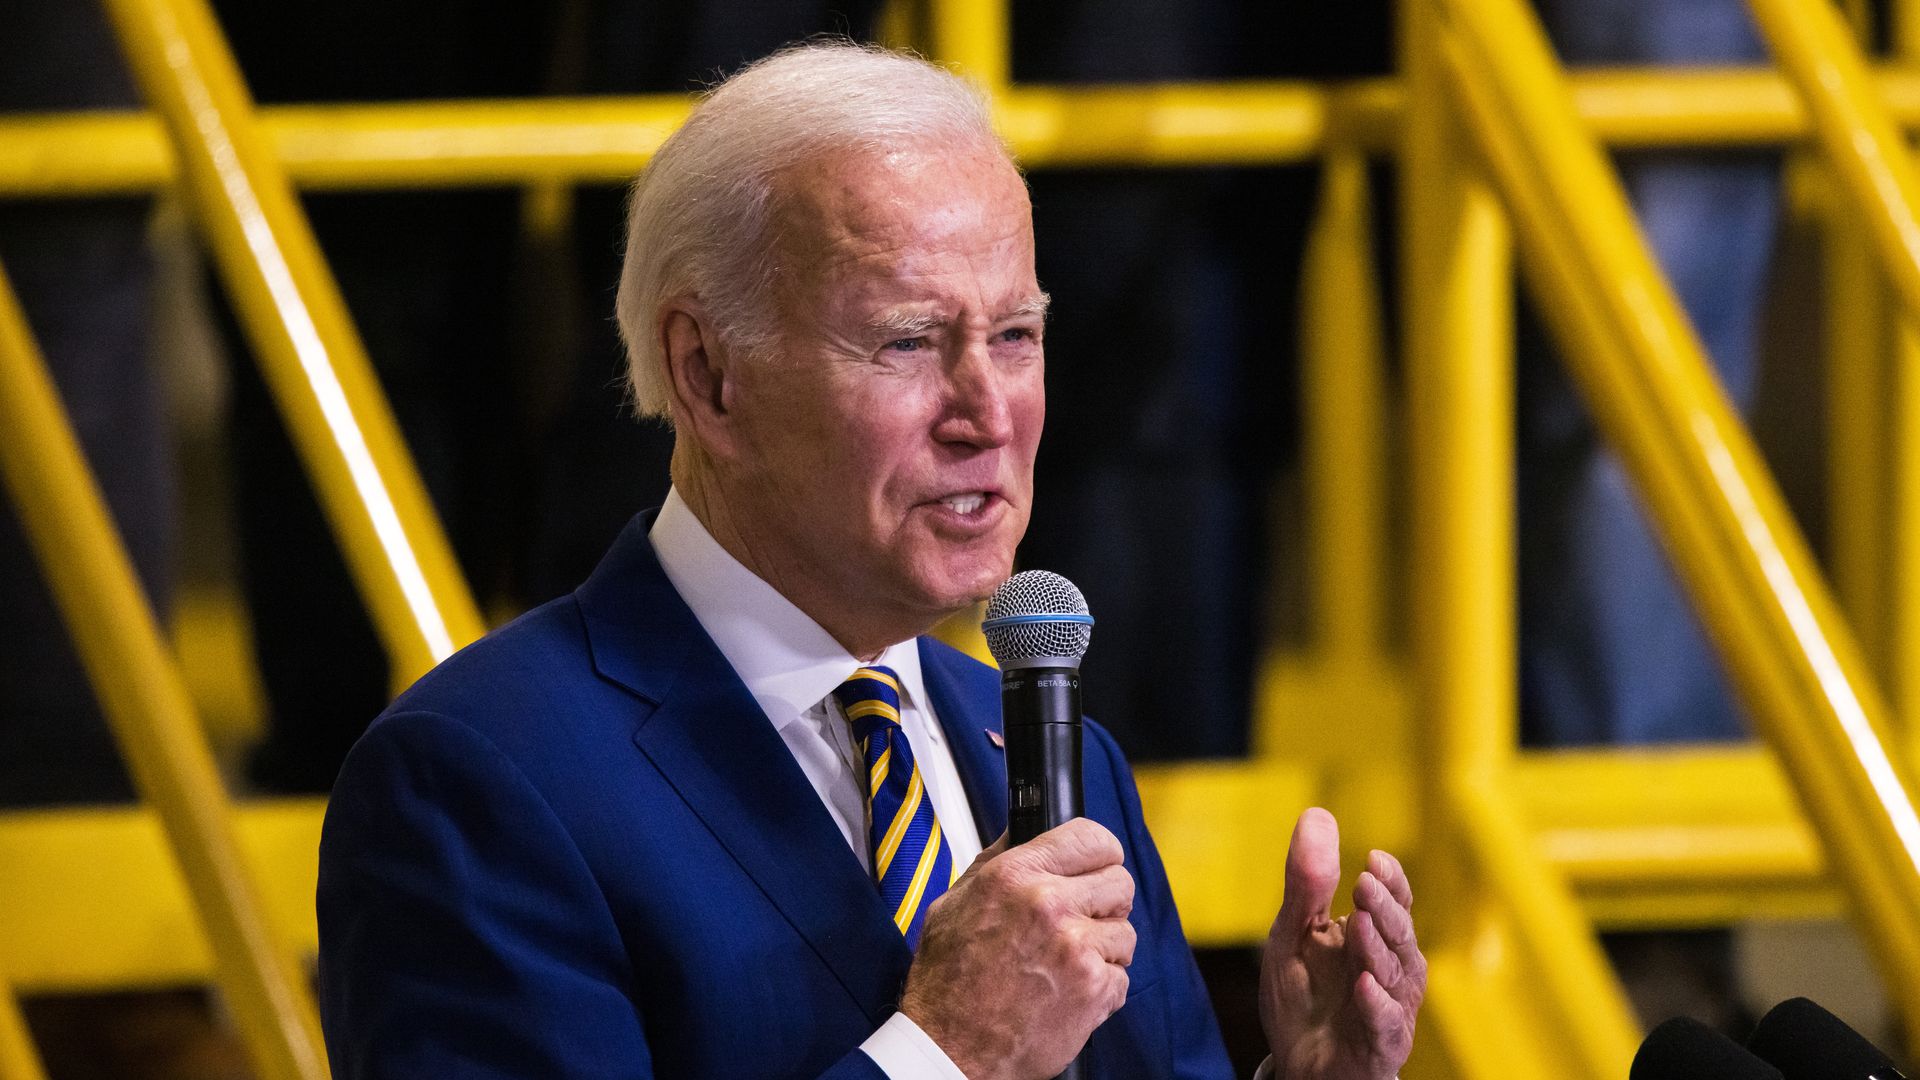  President Joe Biden gives a speech on infrastructure at the West Side Yard on January 31, 2023 in New York City.